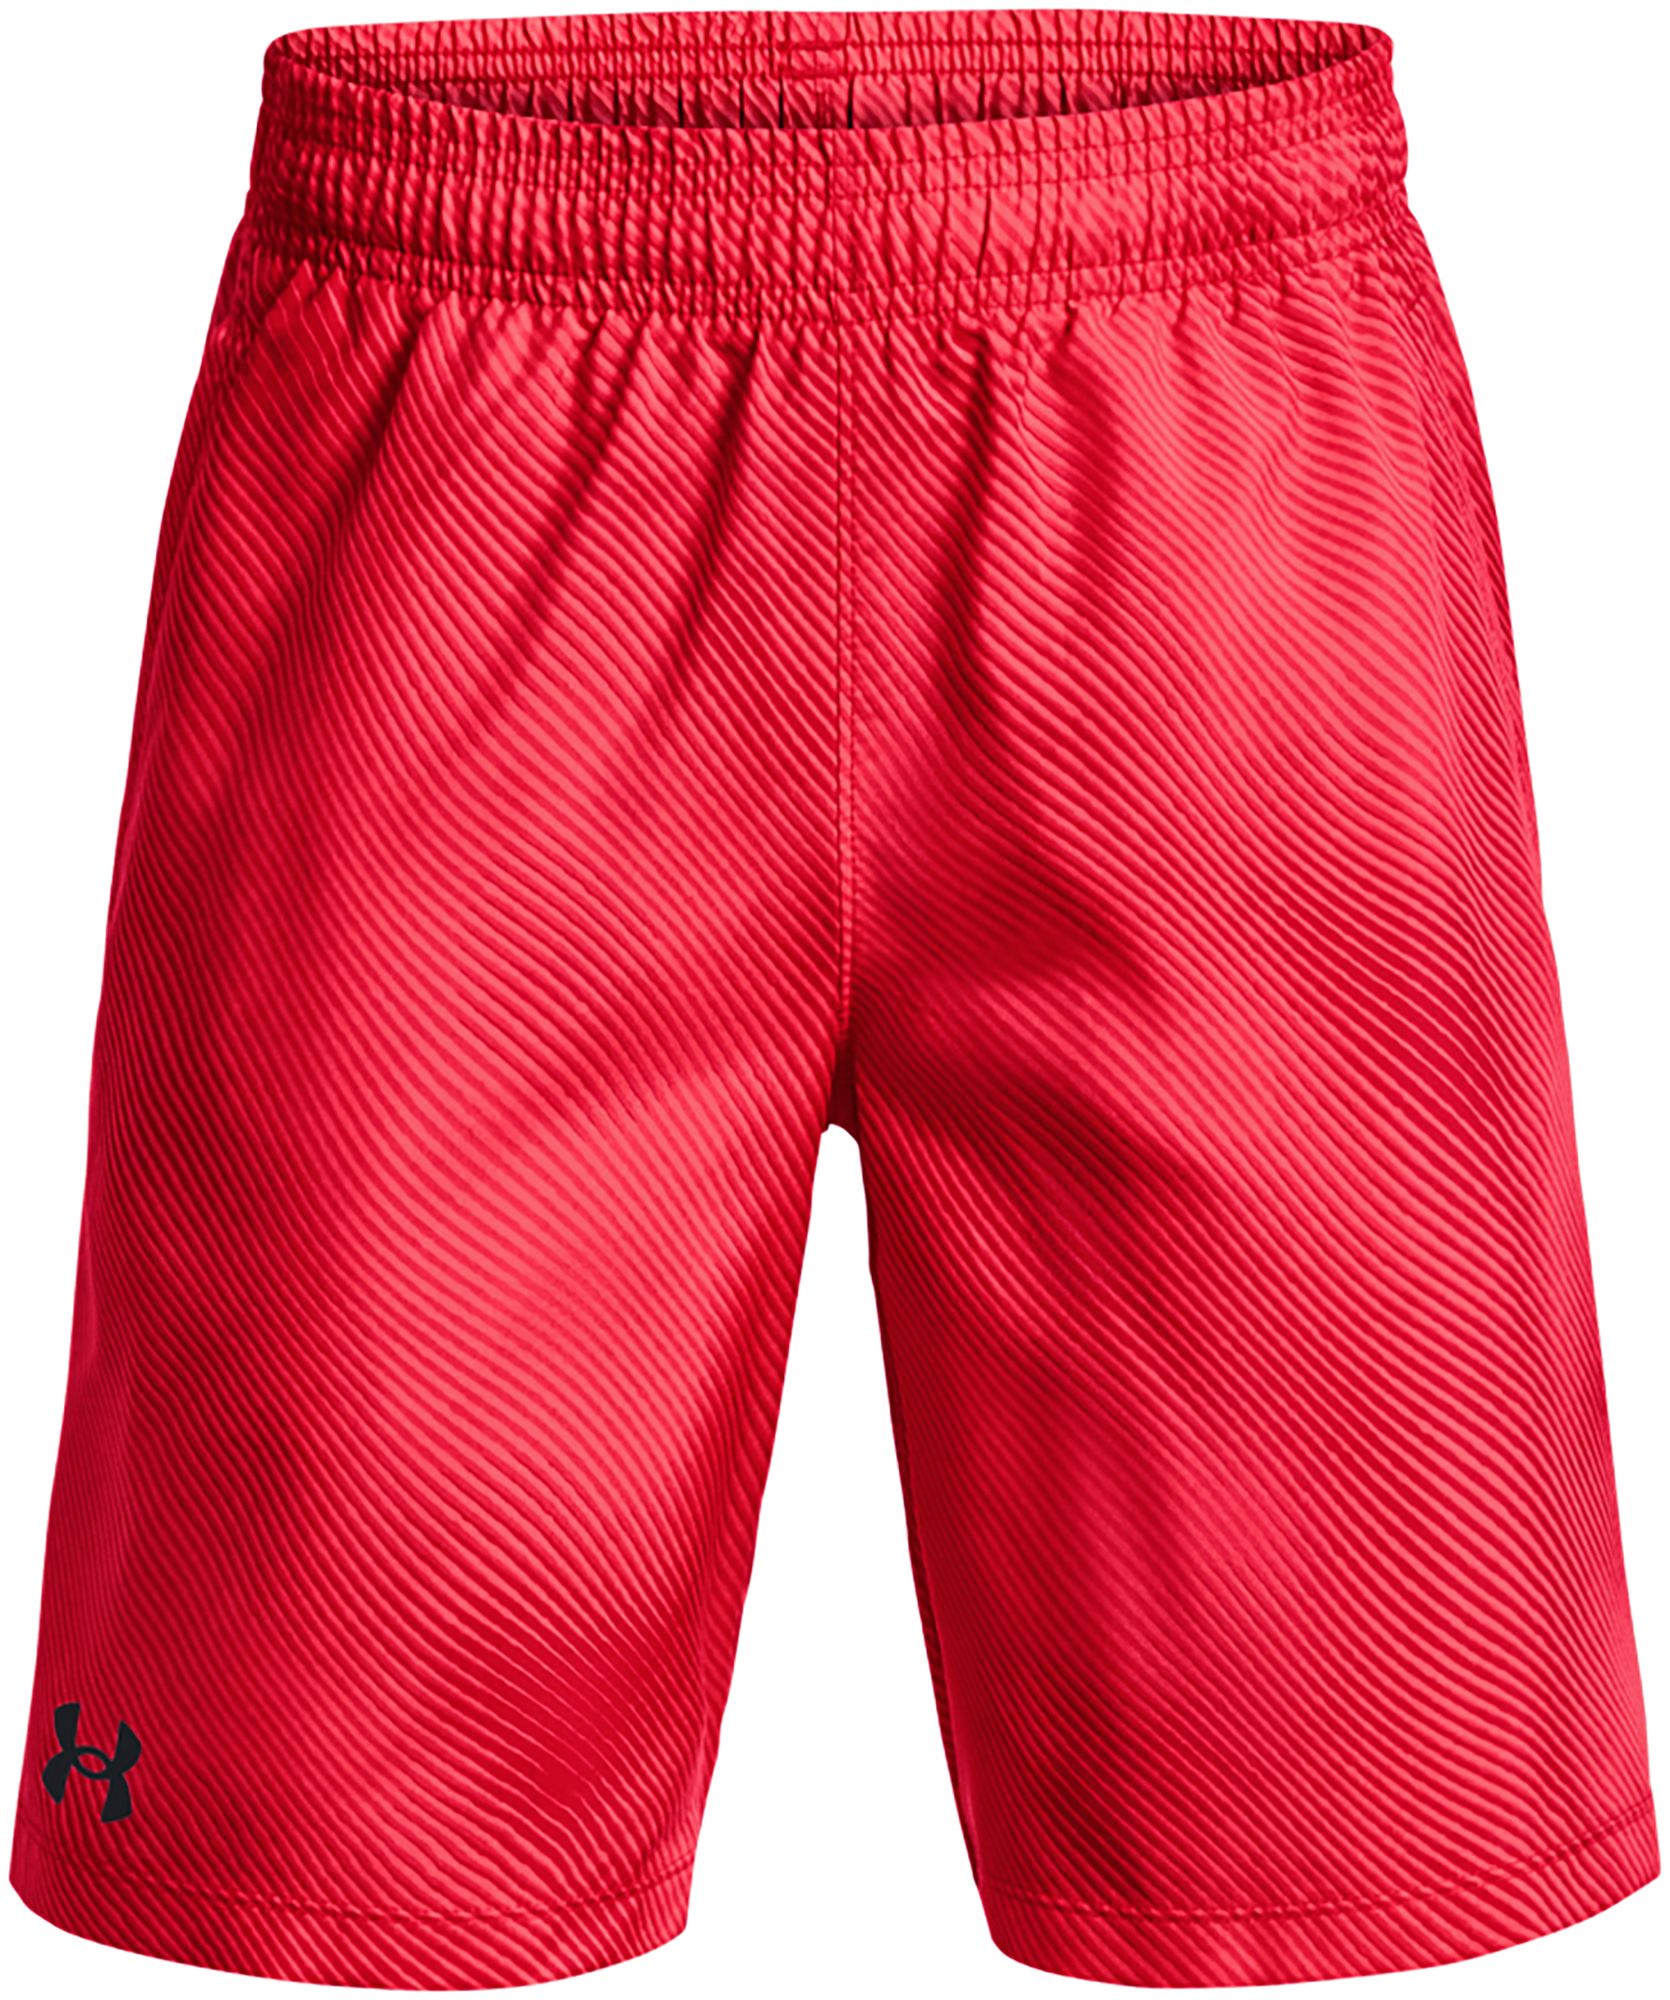 Under Armour Kids' Woven Printed Shorts